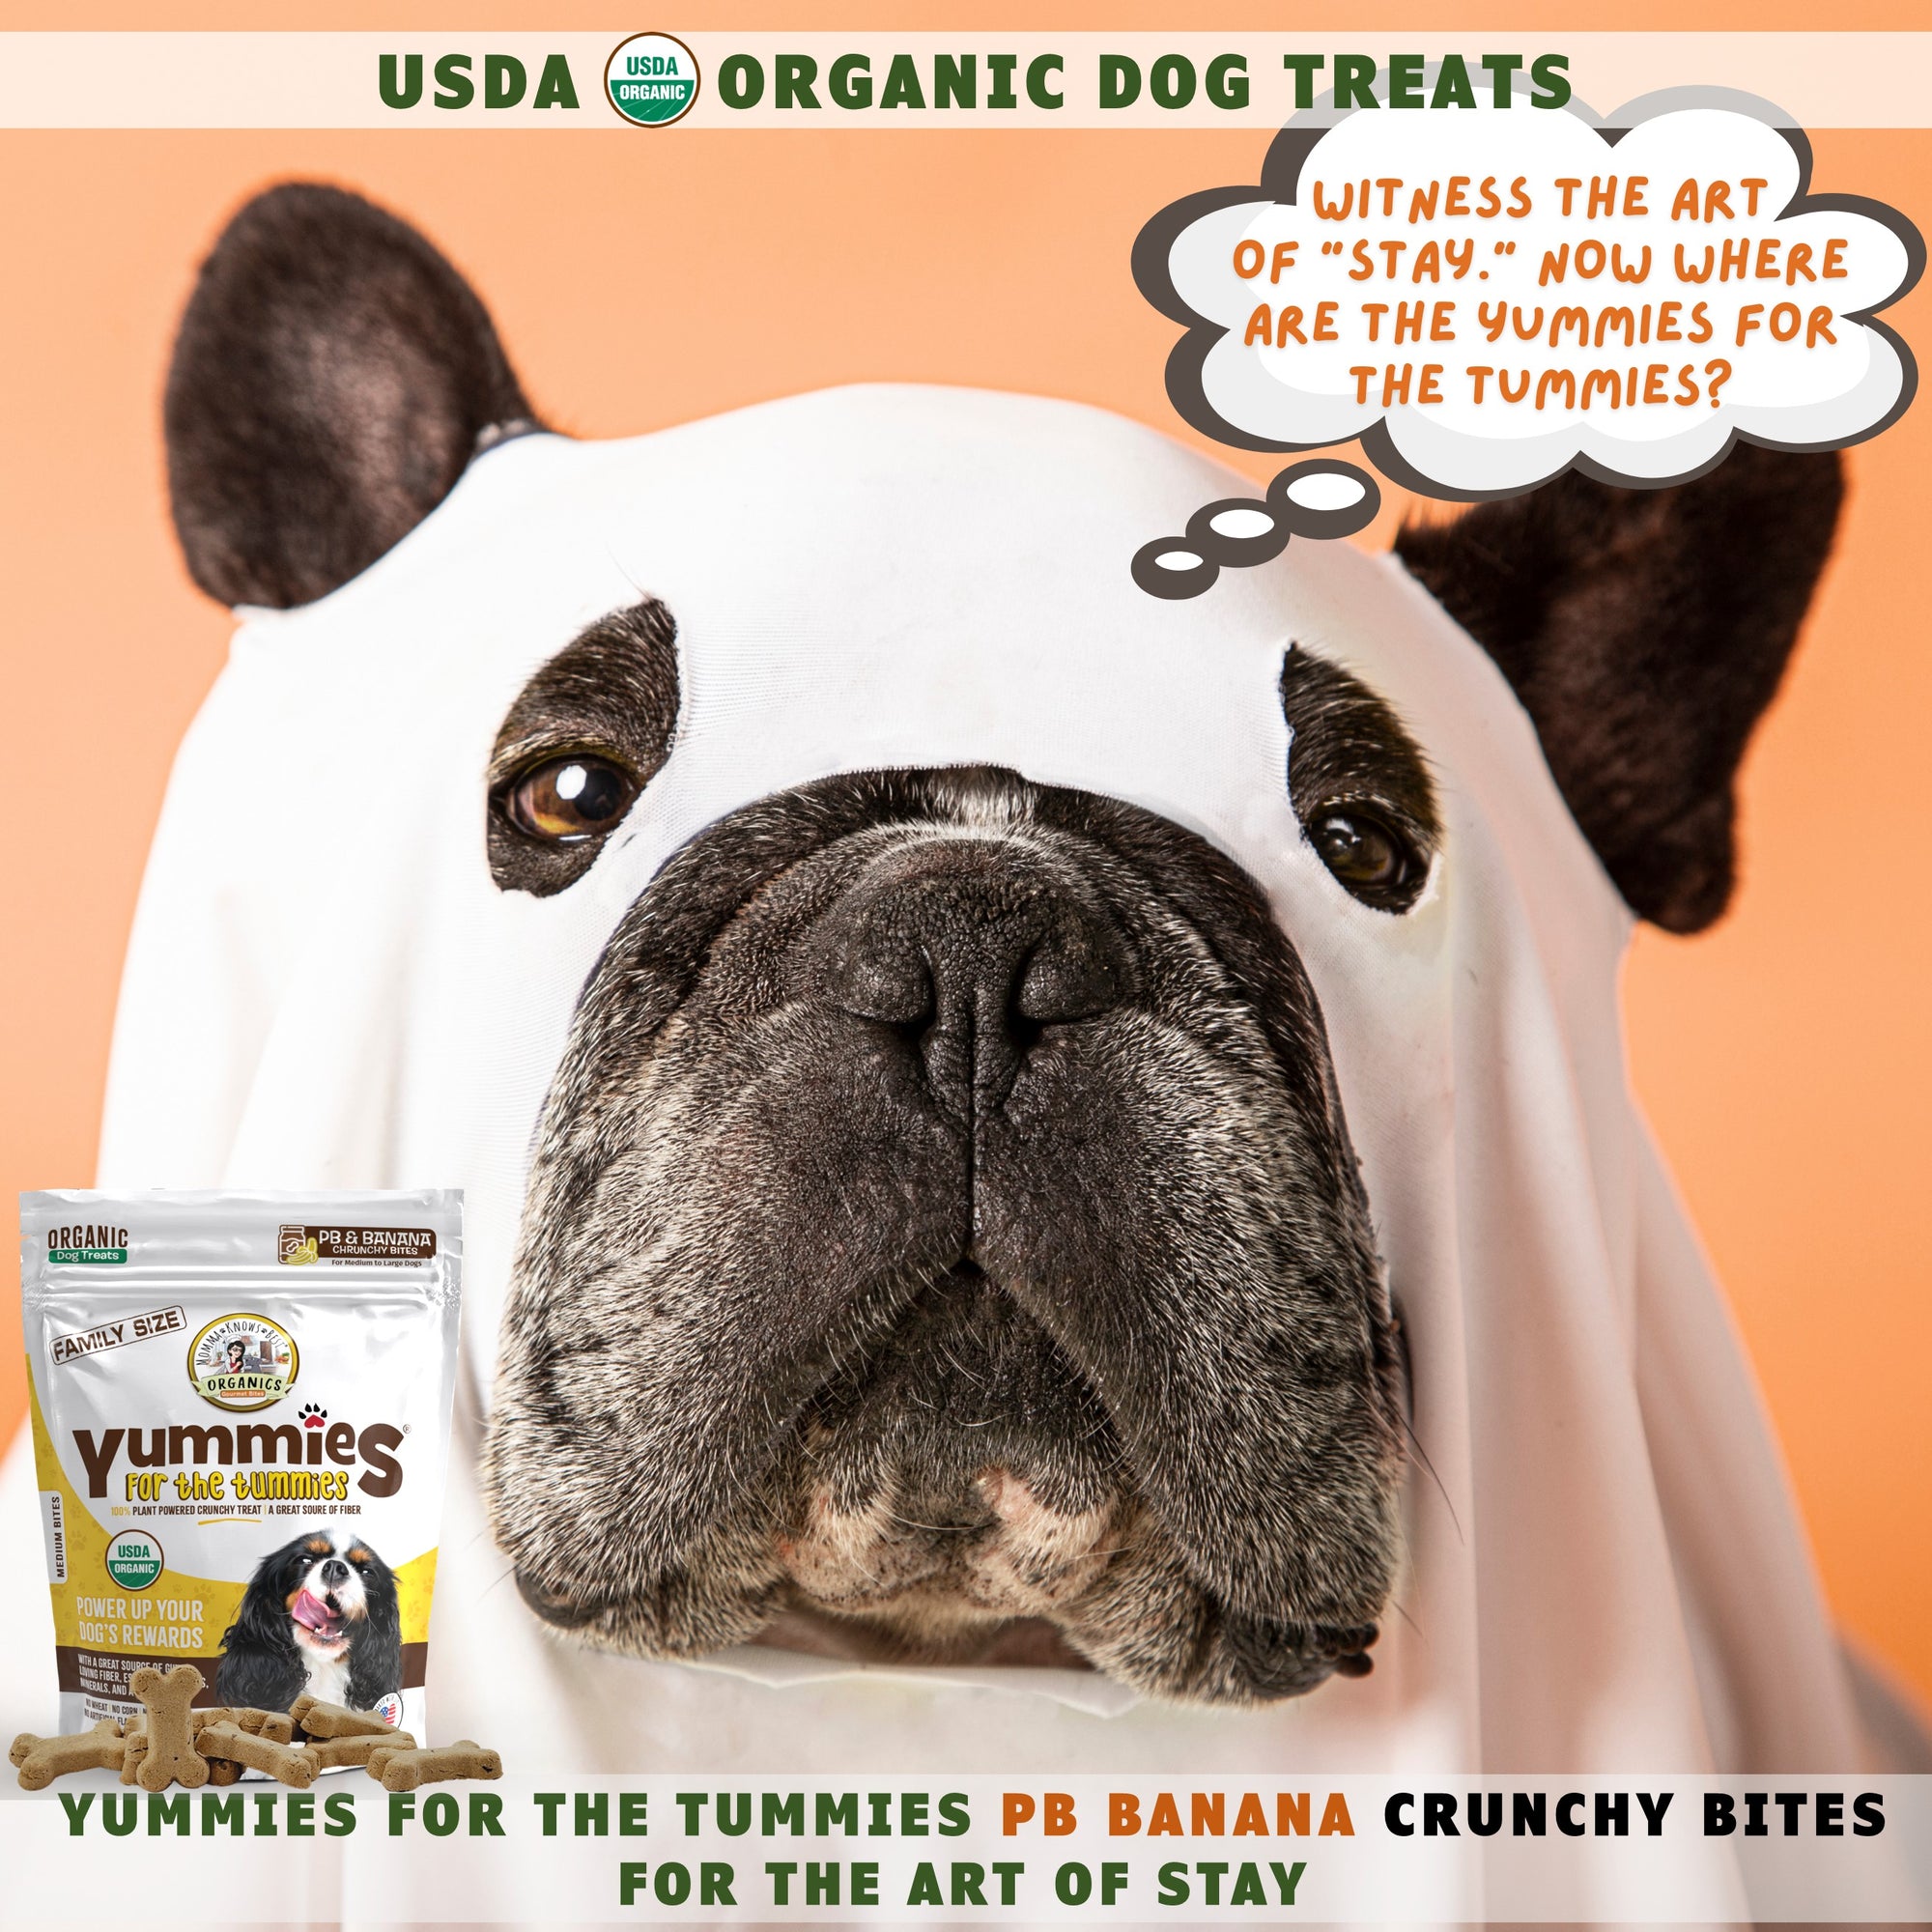 A dog wearing a costume next to a bag of healthy pb banana dog treats Yummies for the Tummies by Momma Knows Best